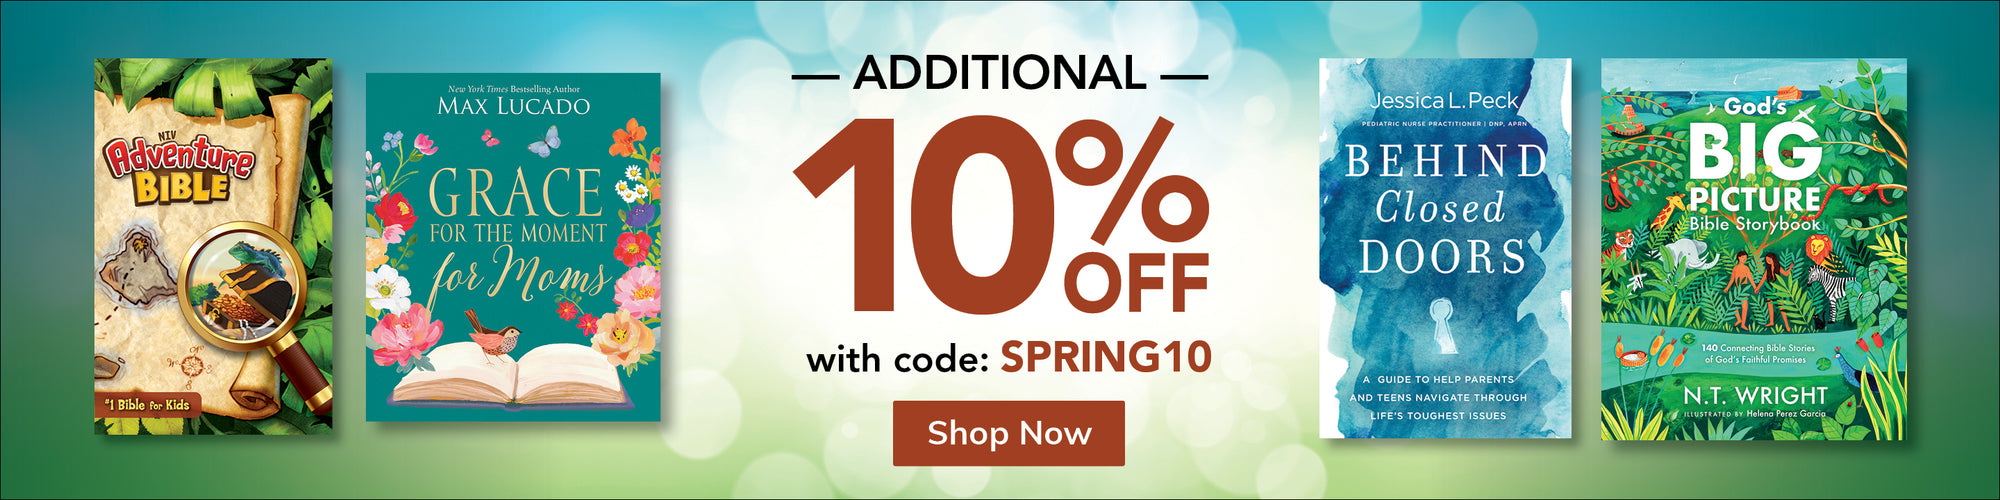 Additional 10% off with code SPRING10